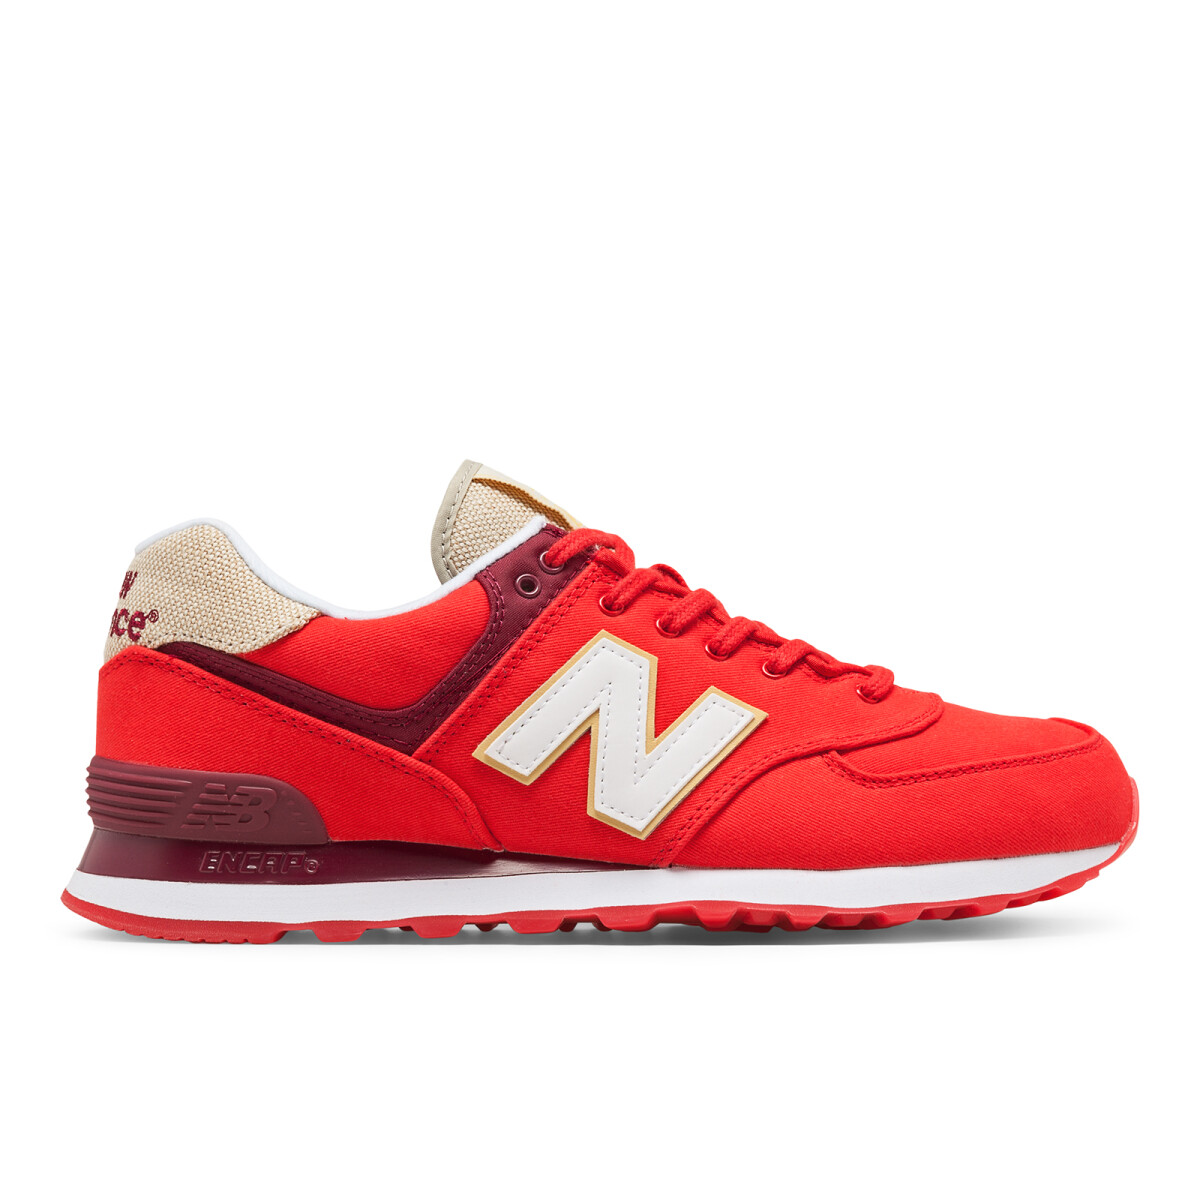 Championes New Balance de Hombre ML574RTC - CHINESE RED 